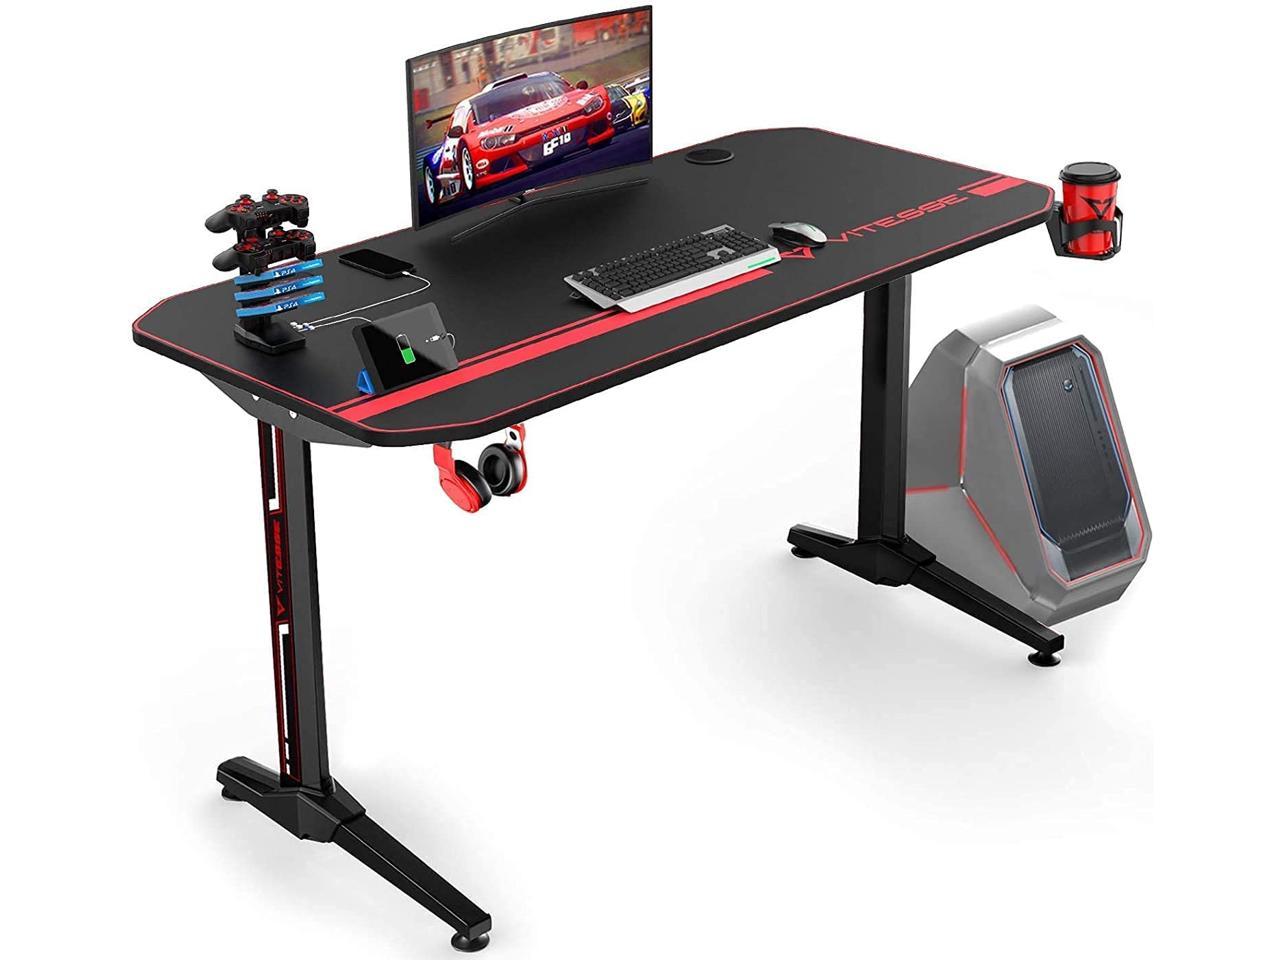 Vitesse 40 Inch Gaming Desk Ergonomic Office Pc Computer Desk With Full Desk Mouse Pad T Shaped Gamer Tables Pro With Usb Gaming Handle Rack Stand Cup Holder Headphone Hook Newegg Com